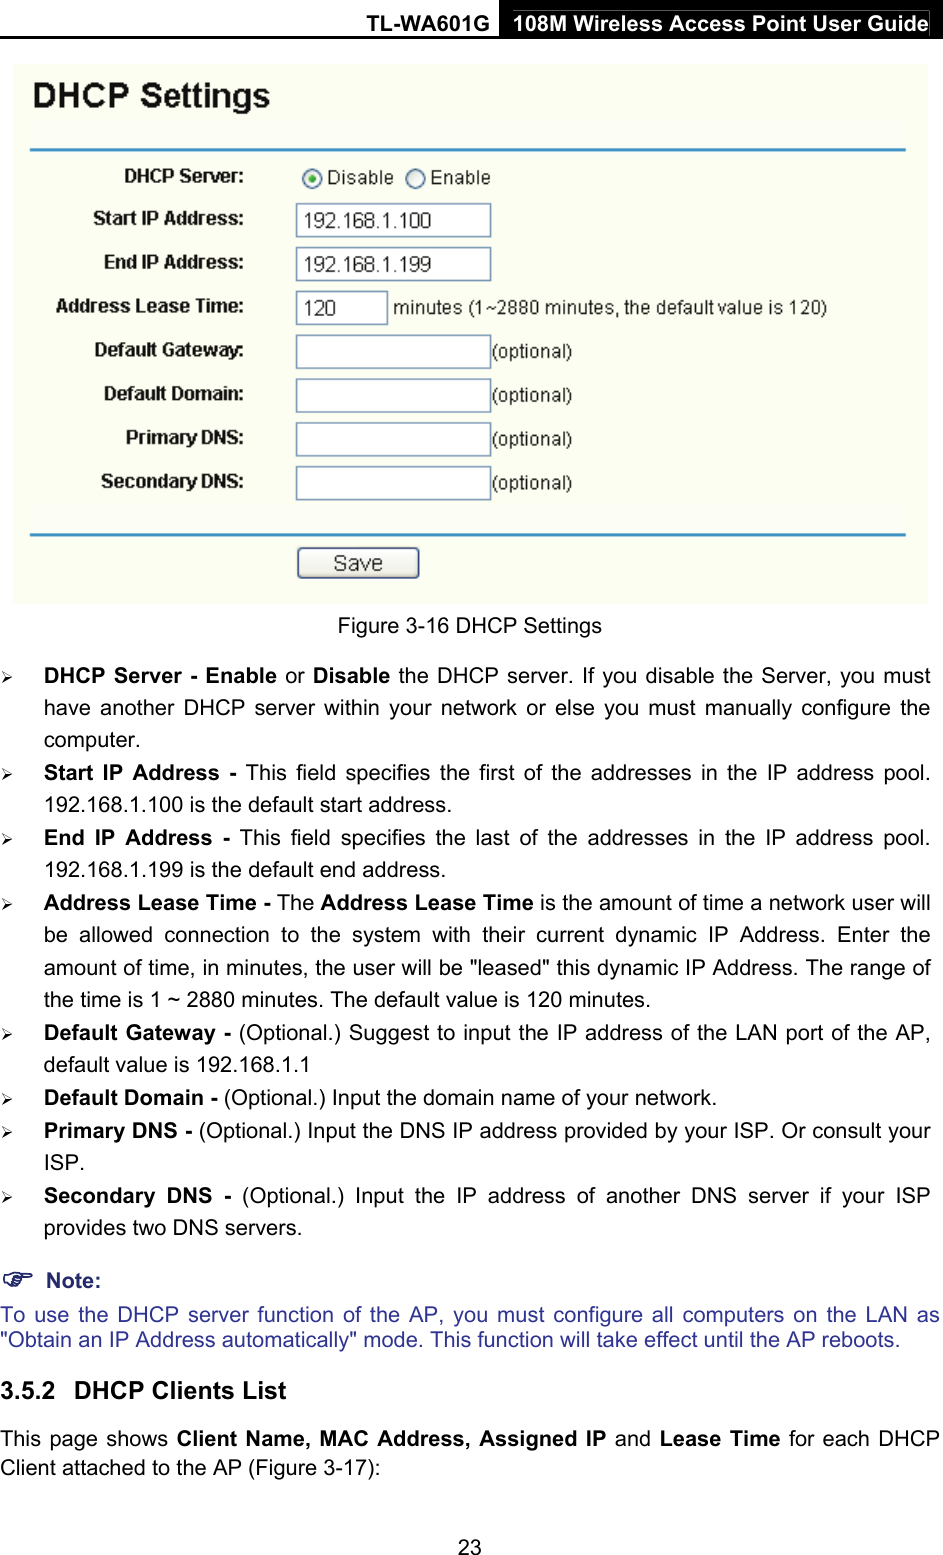 TL-WA601G 108M Wireless Access Point User Guide  23 Figure 3-16 DHCP Settings ¾ DHCP Server - Enable or Disable the DHCP server. If you disable the Server, you must have another DHCP server within your network or else you must manually configure the computer. ¾ Start IP Address - This field specifies the first of the addresses in the IP address pool. 192.168.1.100 is the default start address. ¾ End IP Address - This field specifies the last of the addresses in the IP address pool. 192.168.1.199 is the default end address. ¾ Address Lease Time - The Address Lease Time is the amount of time a network user will be allowed connection to the system with their current dynamic IP Address. Enter the amount of time, in minutes, the user will be &quot;leased&quot; this dynamic IP Address. The range of the time is 1 ~ 2880 minutes. The default value is 120 minutes. ¾ Default Gateway - (Optional.) Suggest to input the IP address of the LAN port of the AP, default value is 192.168.1.1 ¾ Default Domain - (Optional.) Input the domain name of your network. ¾ Primary DNS - (Optional.) Input the DNS IP address provided by your ISP. Or consult your ISP. ¾ Secondary DNS - (Optional.) Input the IP address of another DNS server if your ISP provides two DNS servers. ) Note: To use the DHCP server function of the AP, you must configure all computers on the LAN as &quot;Obtain an IP Address automatically&quot; mode. This function will take effect until the AP reboots. 3.5.2  DHCP Clients List This page shows Client Name, MAC Address, Assigned IP and Lease Time for each DHCP Client attached to the AP (Figure 3-17): 